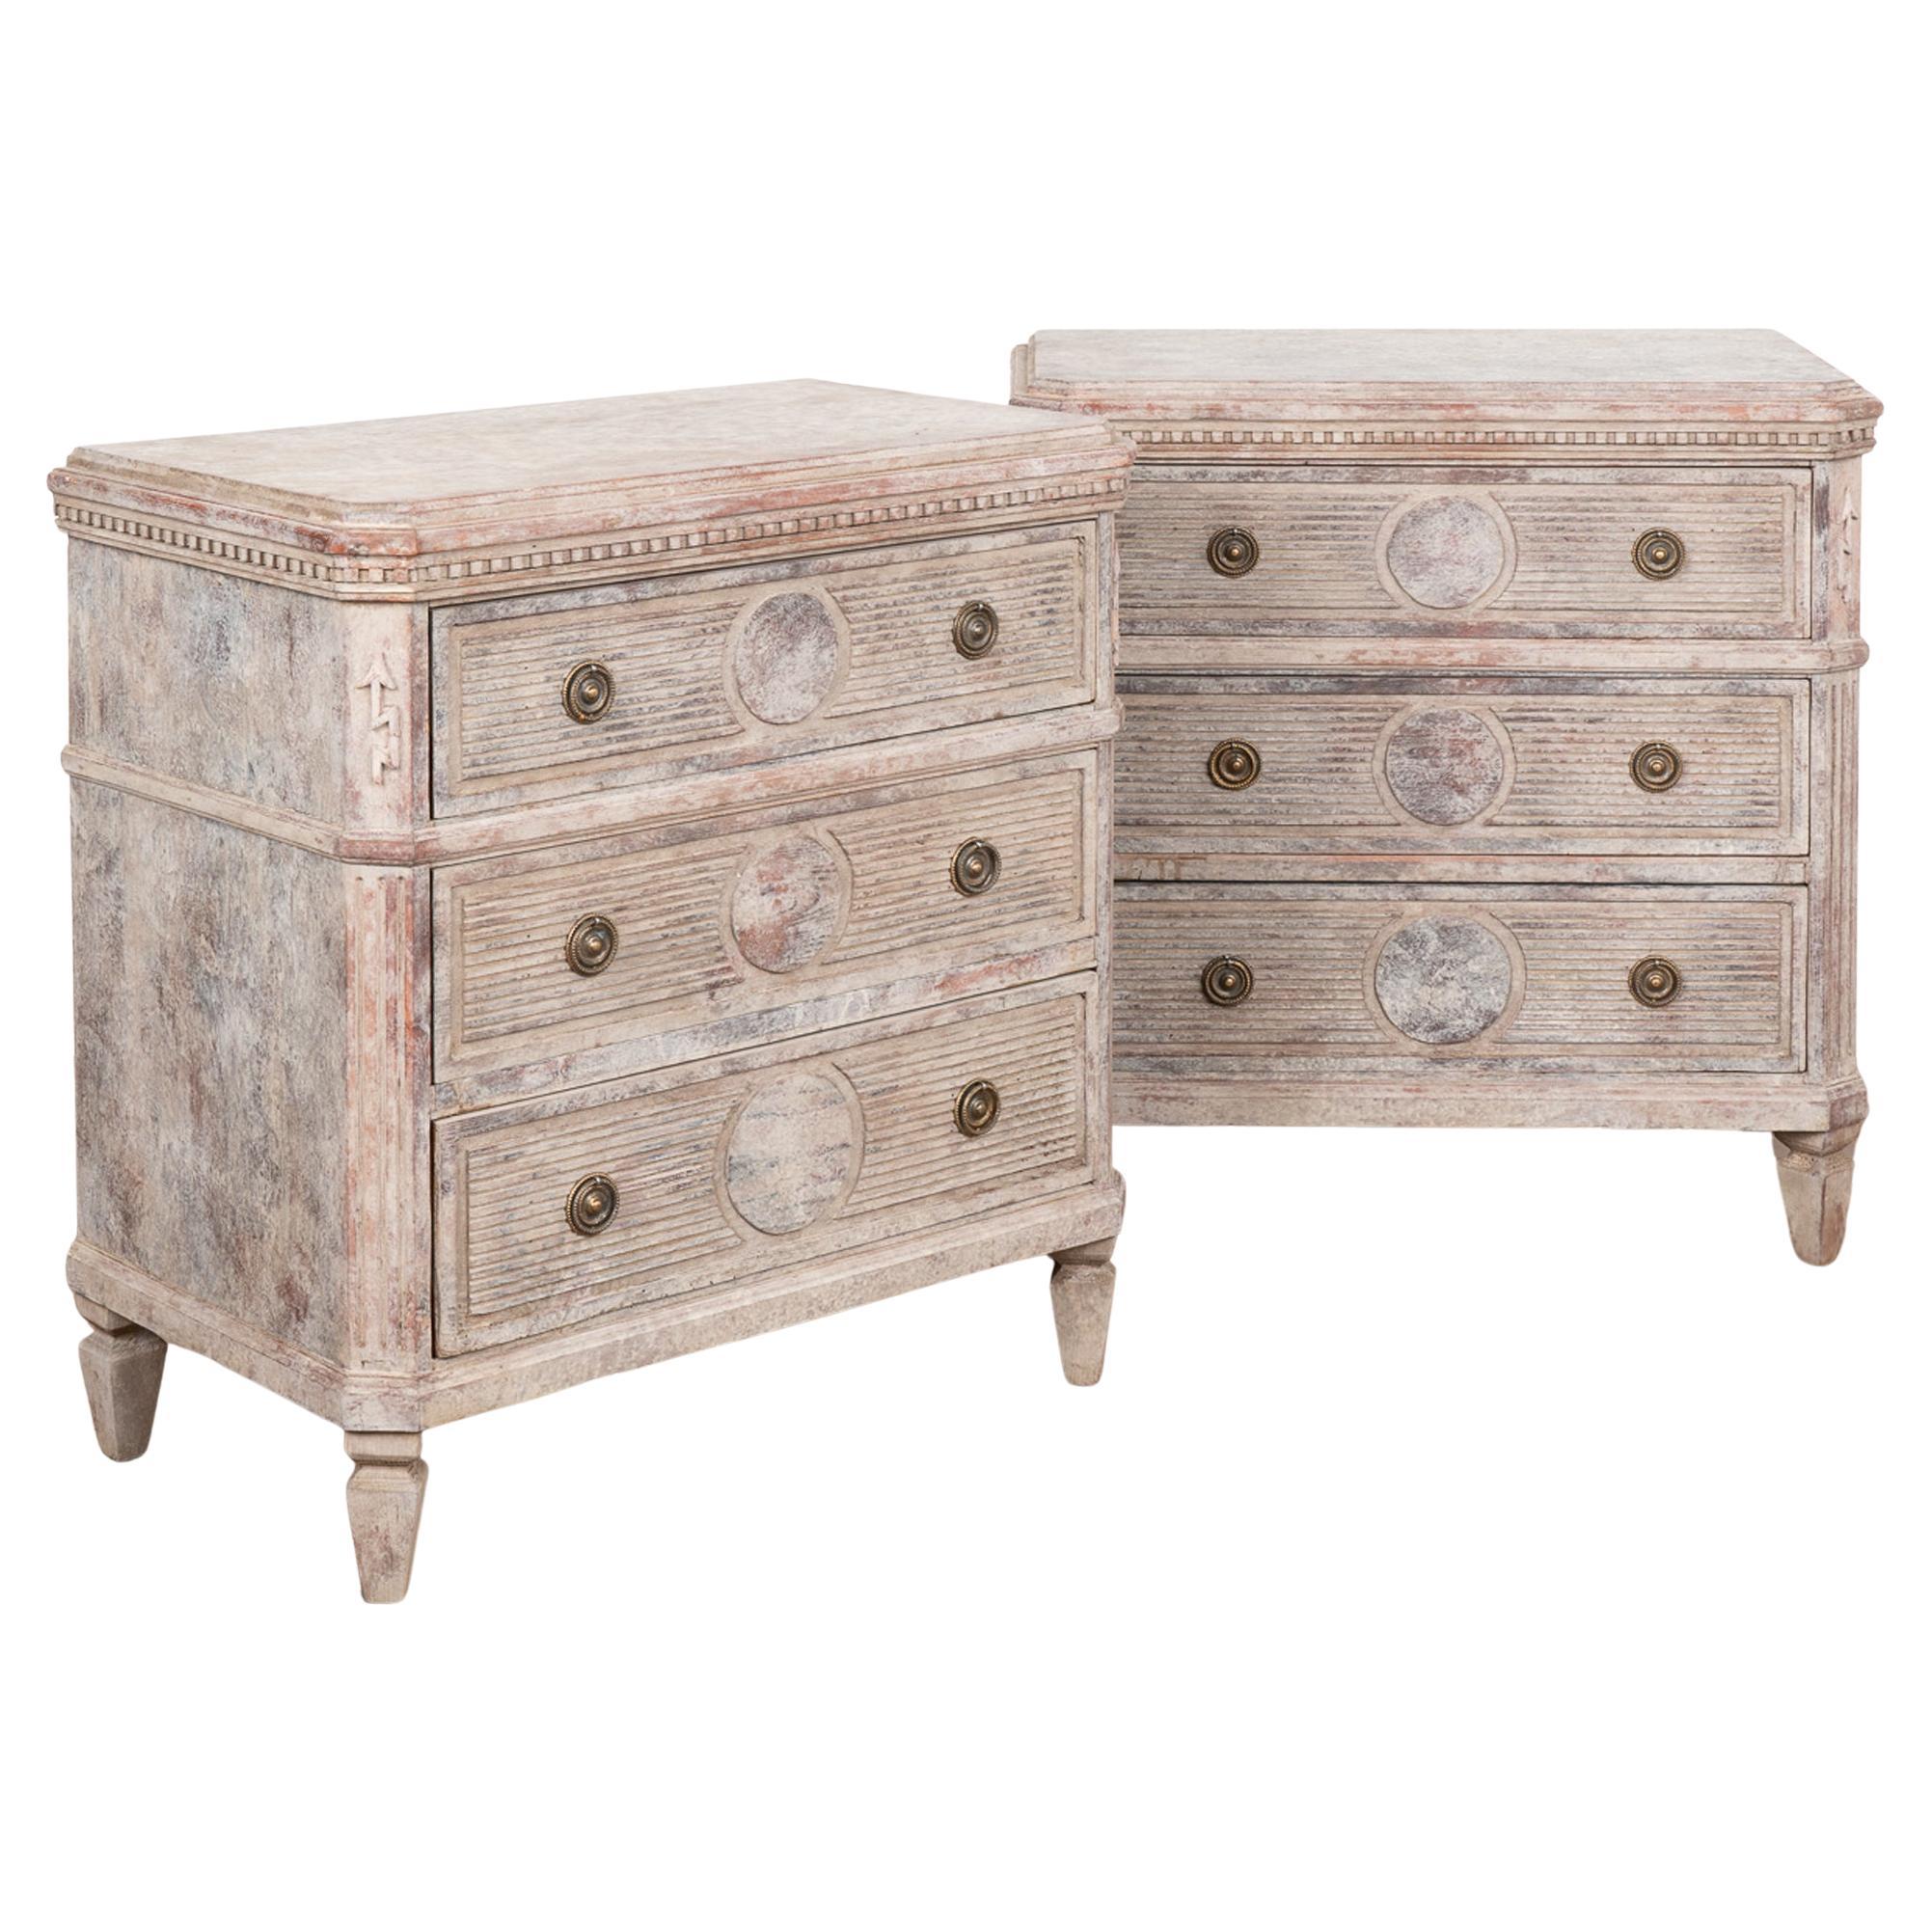 Pair, Gray Painted Gustavian Chest of Drawers, Sweden circa 1840-60